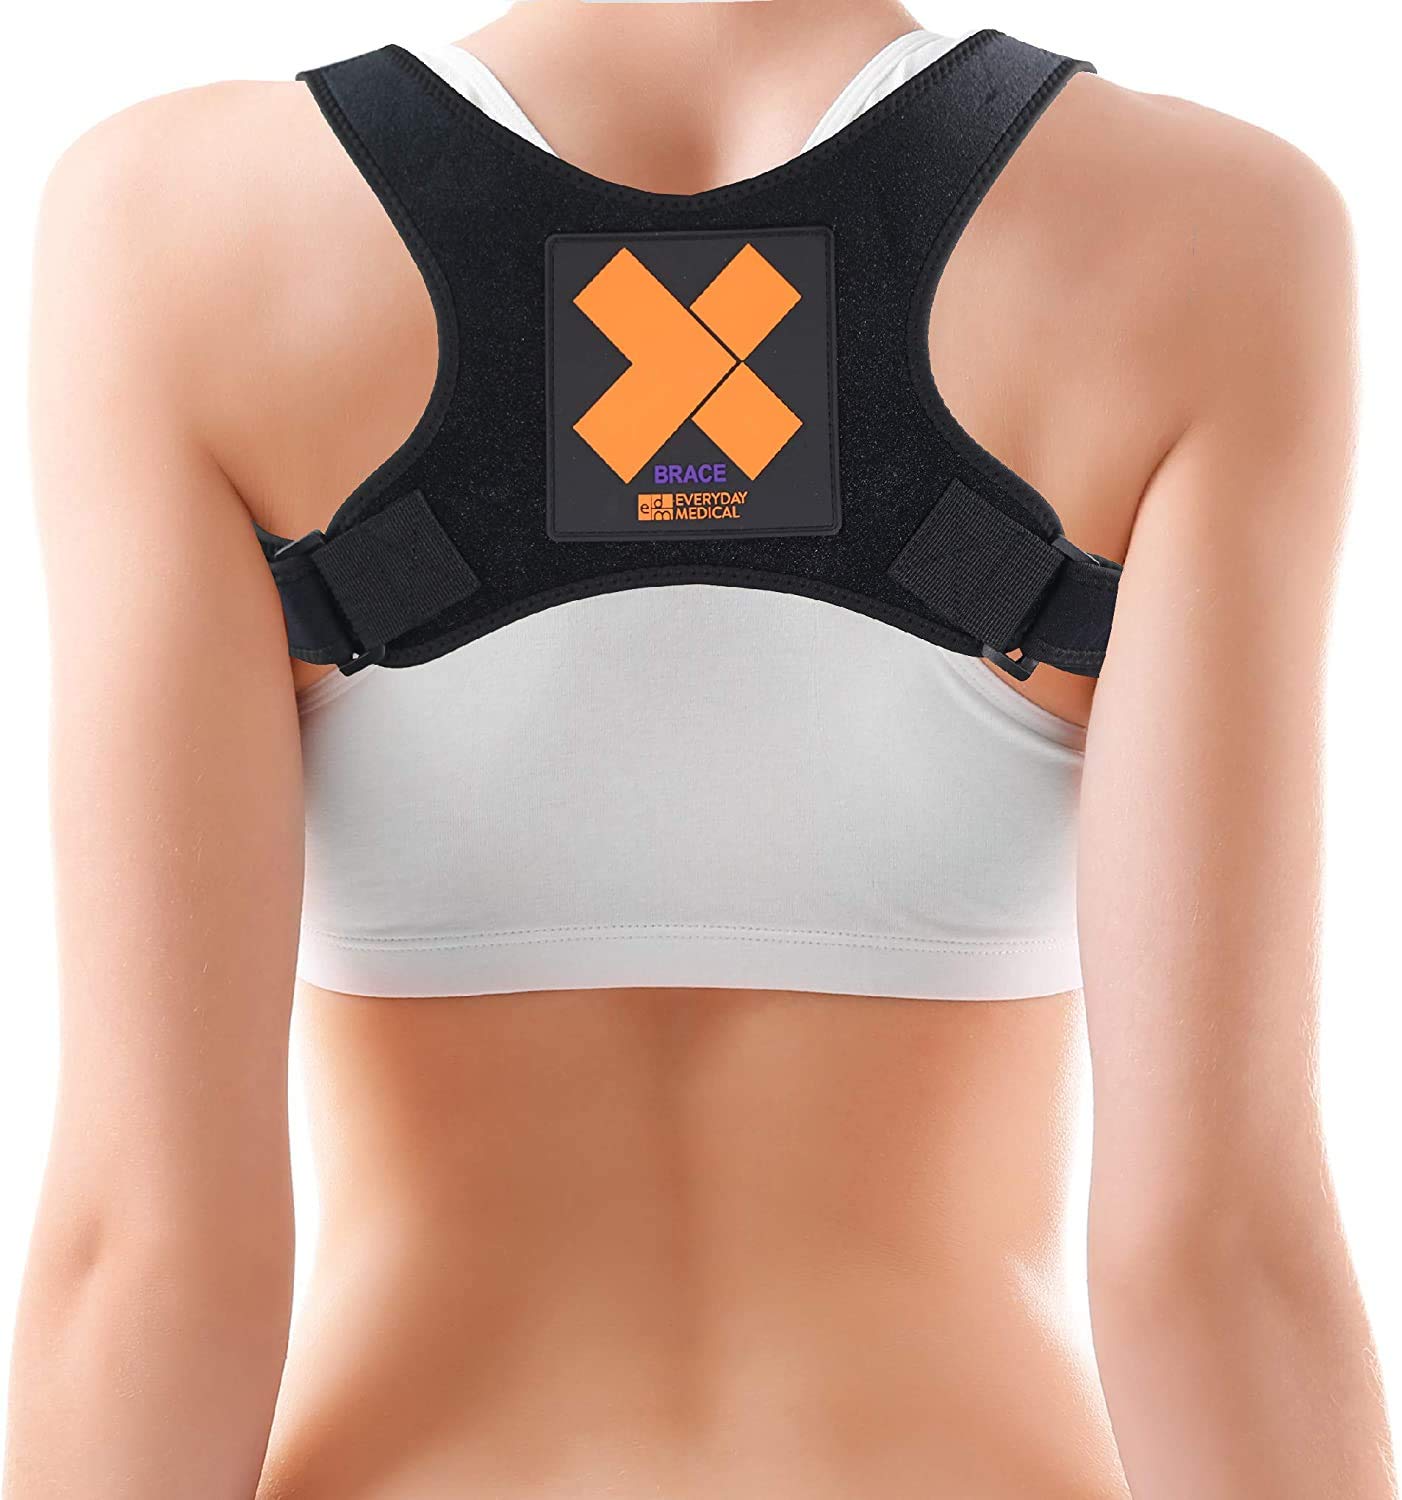 Posture bra for rounded shoulders helps to correct slouching